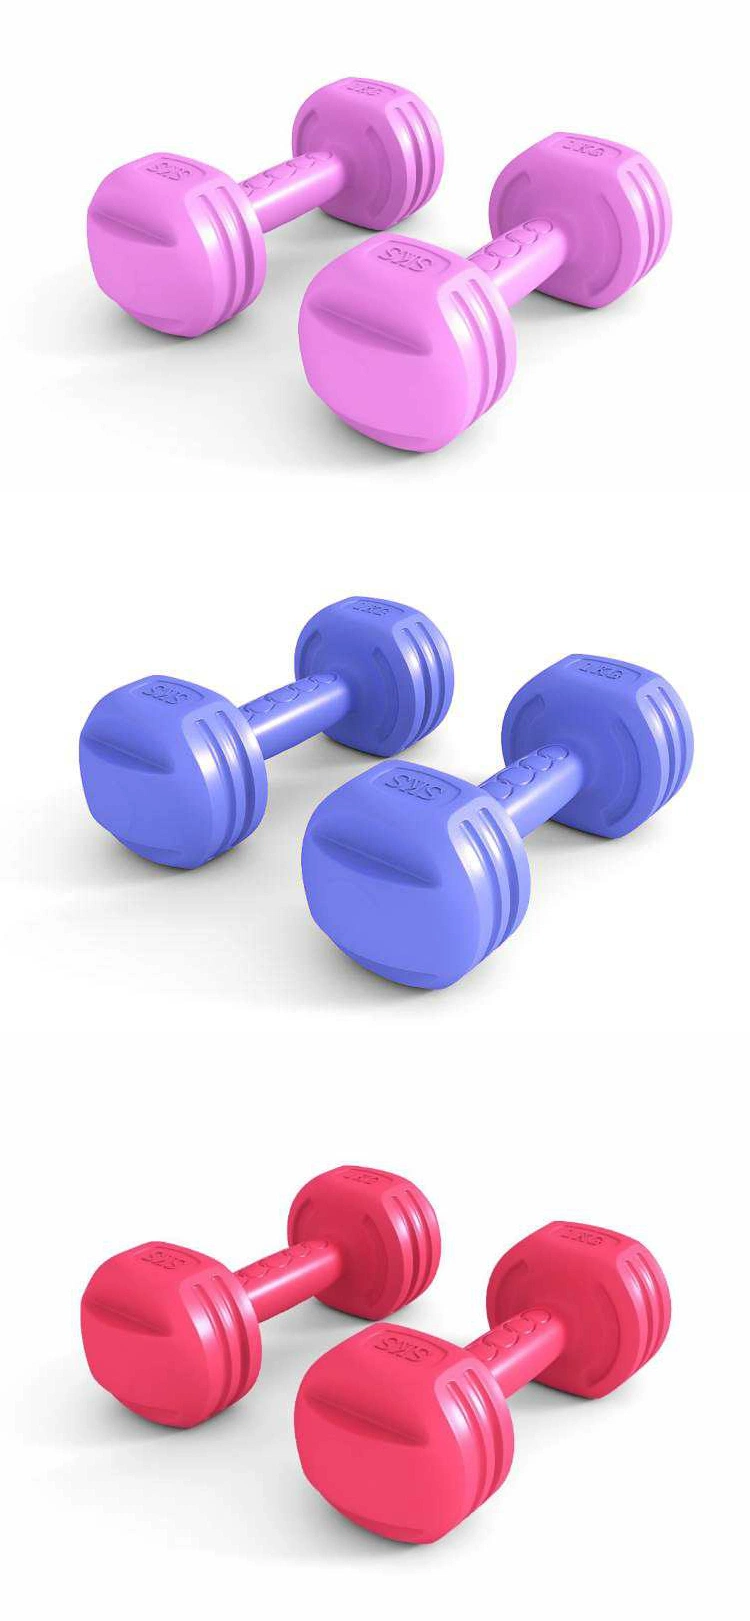 Professional Exercise Equipment Body Building Home Gym Fitness Small Dumbbell Set